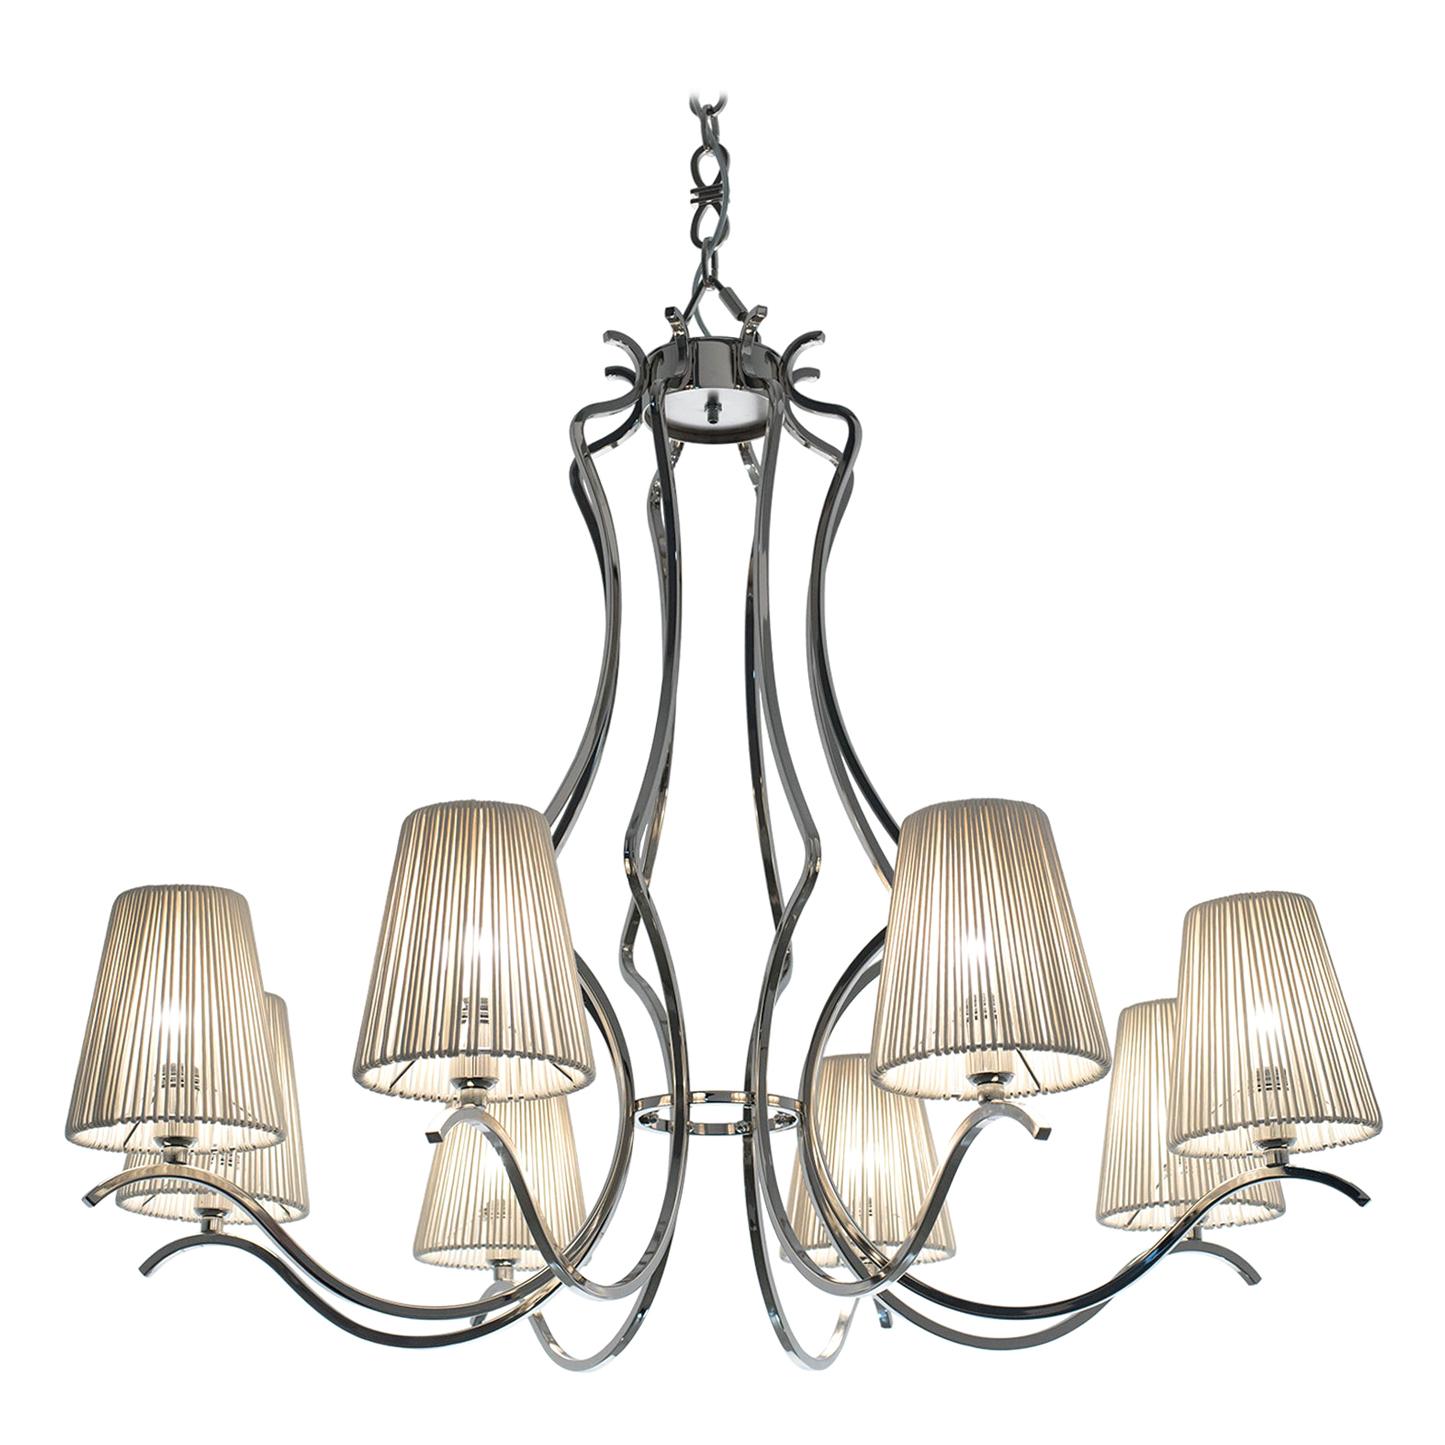 21st Century Sinuosa Nickel Chandelier and White Shades by Patrizia Garganti For Sale